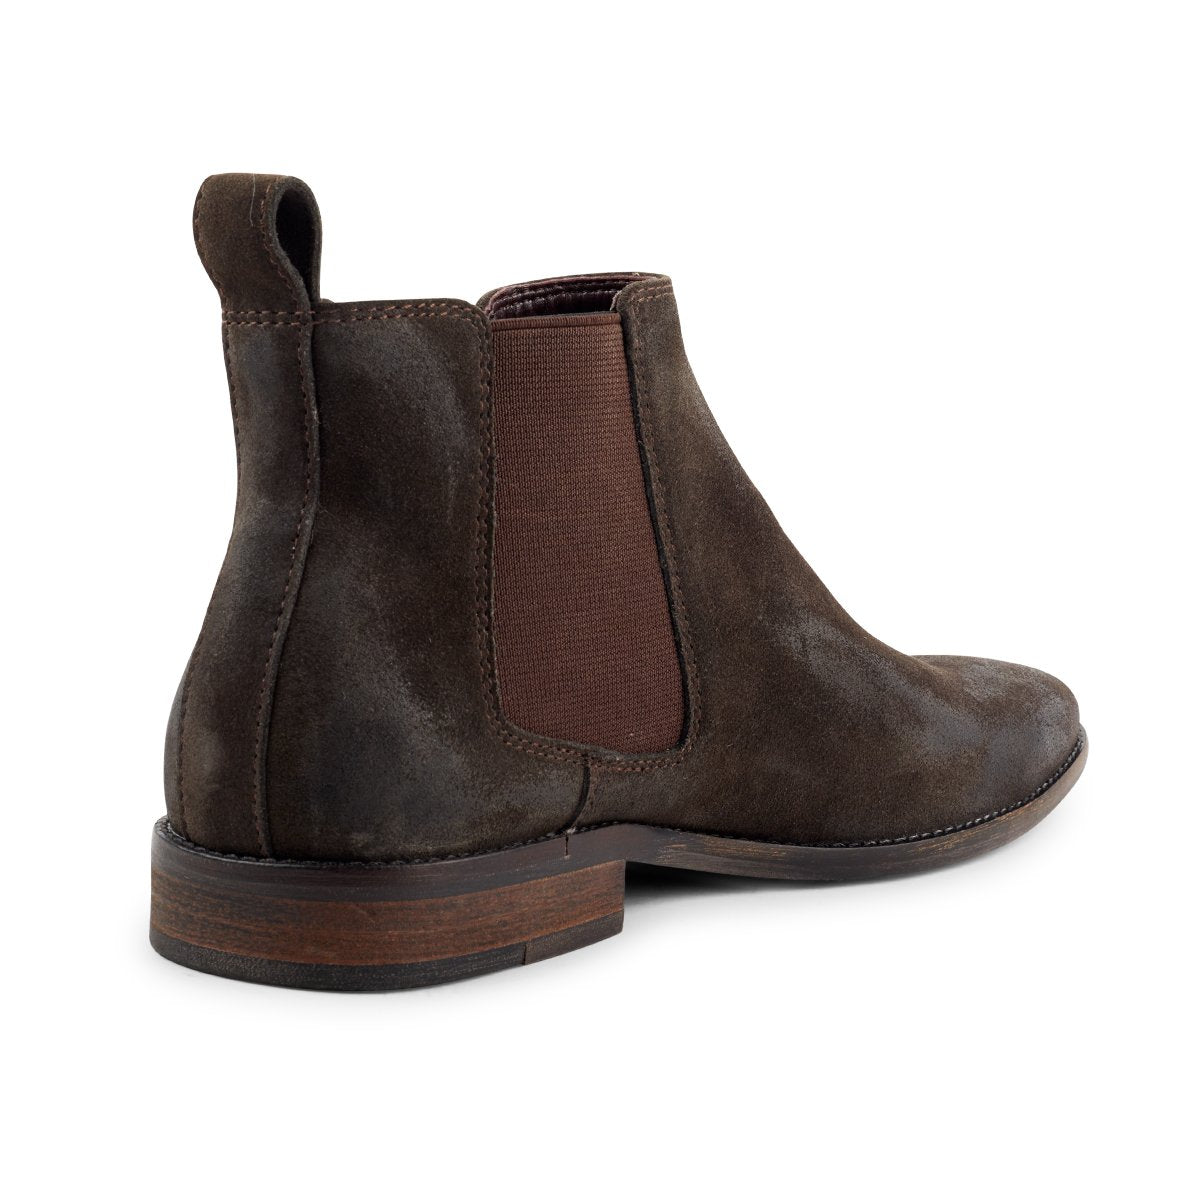 Camden oiled leather nu-buck Chelsea boot in chocolate - Milu James St